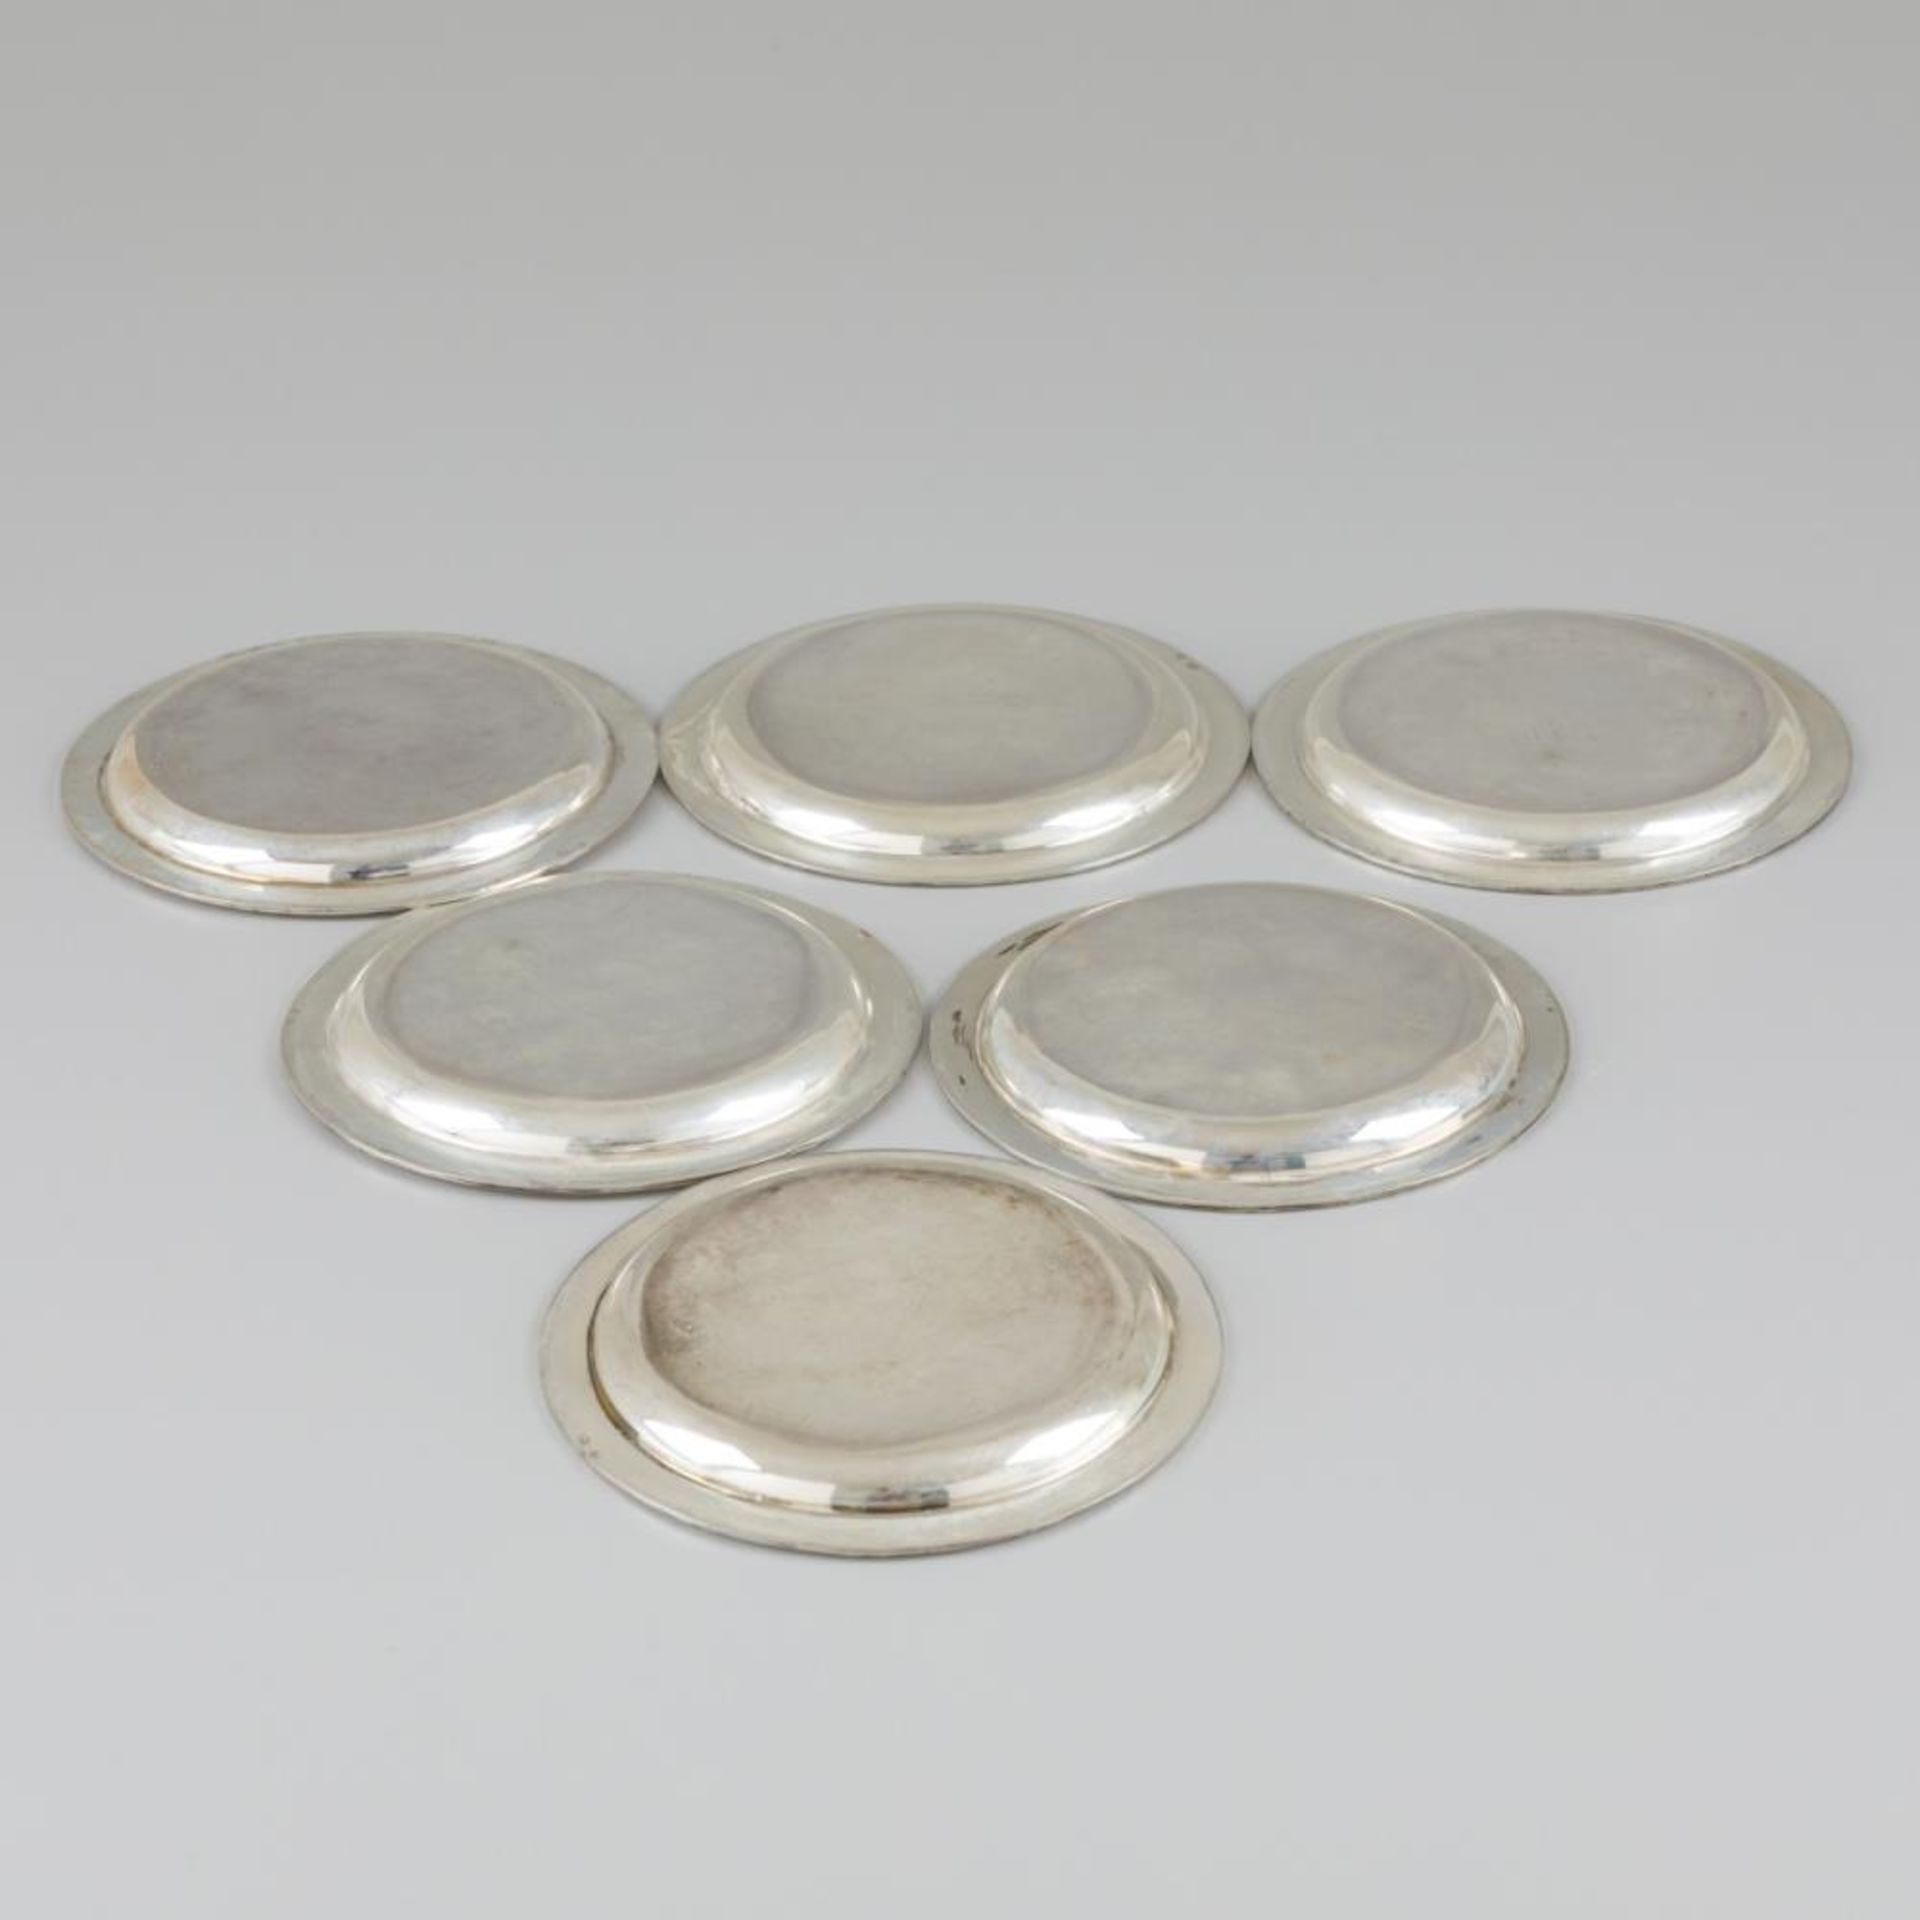 6-piece set of coasters silver. - Image 5 of 6